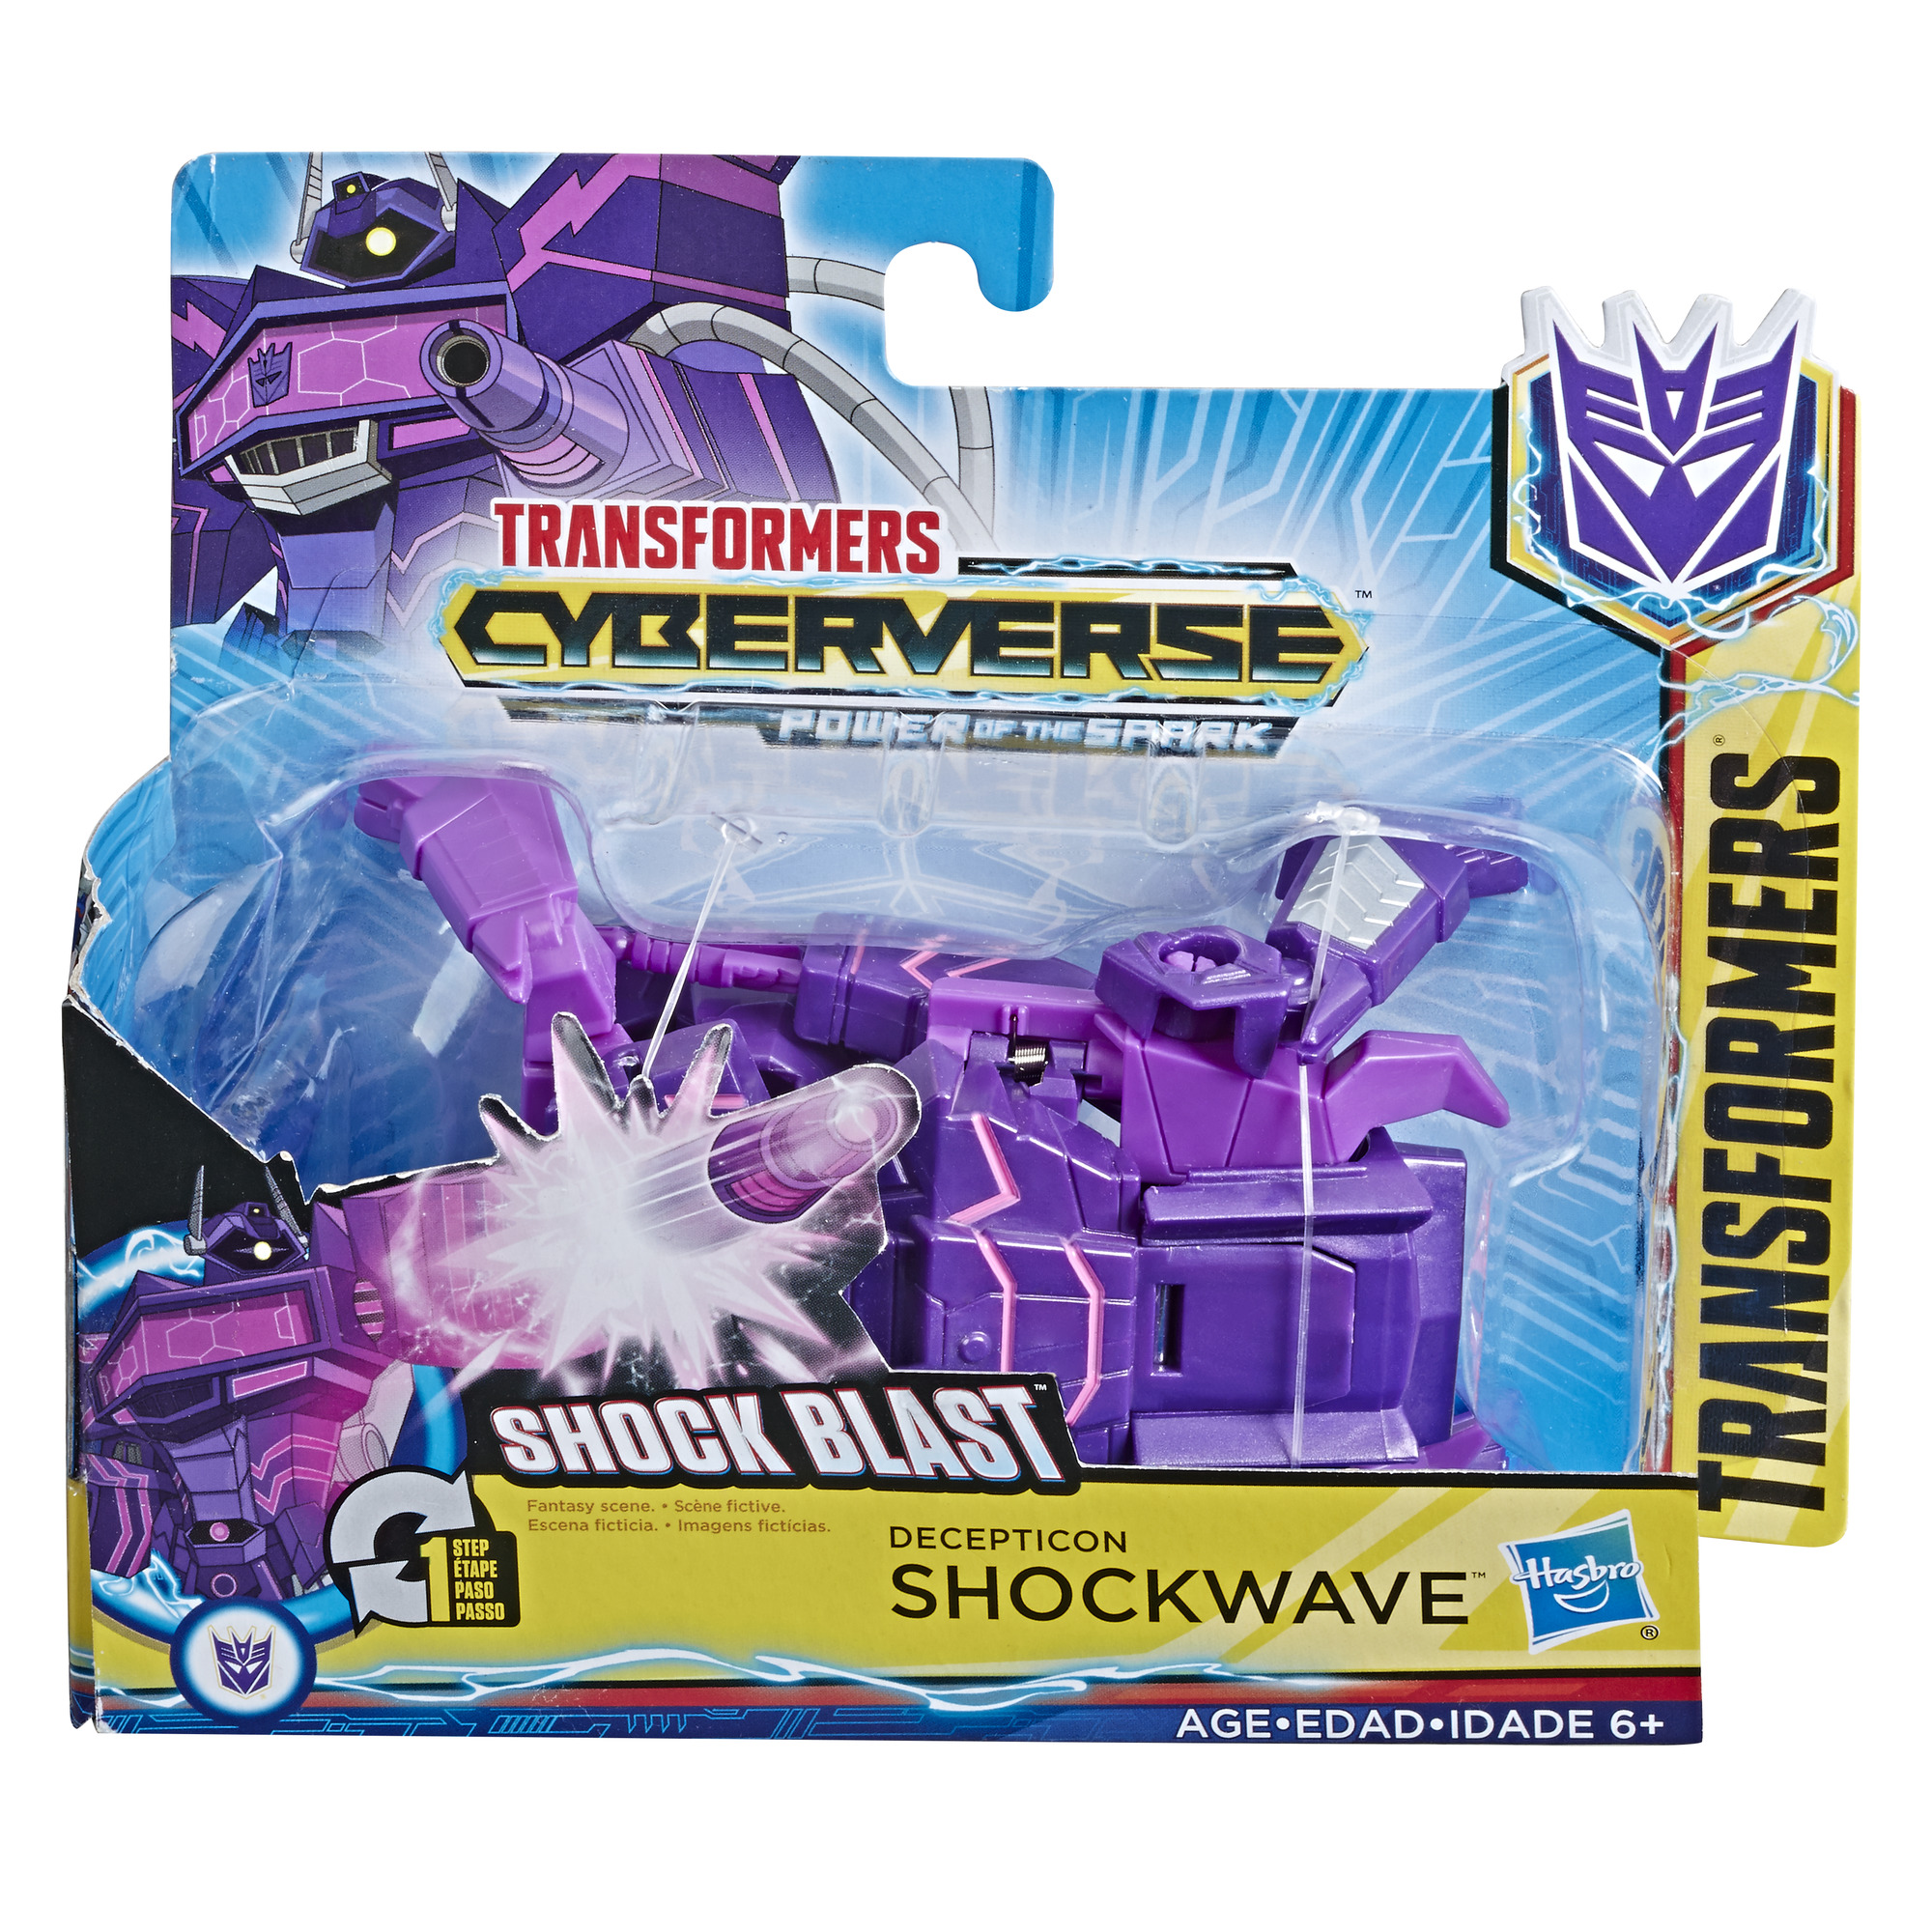 Transformers Cyberverse Action Attackers: 1-Step Changer Shockwave Action Figure - image 2 of 10